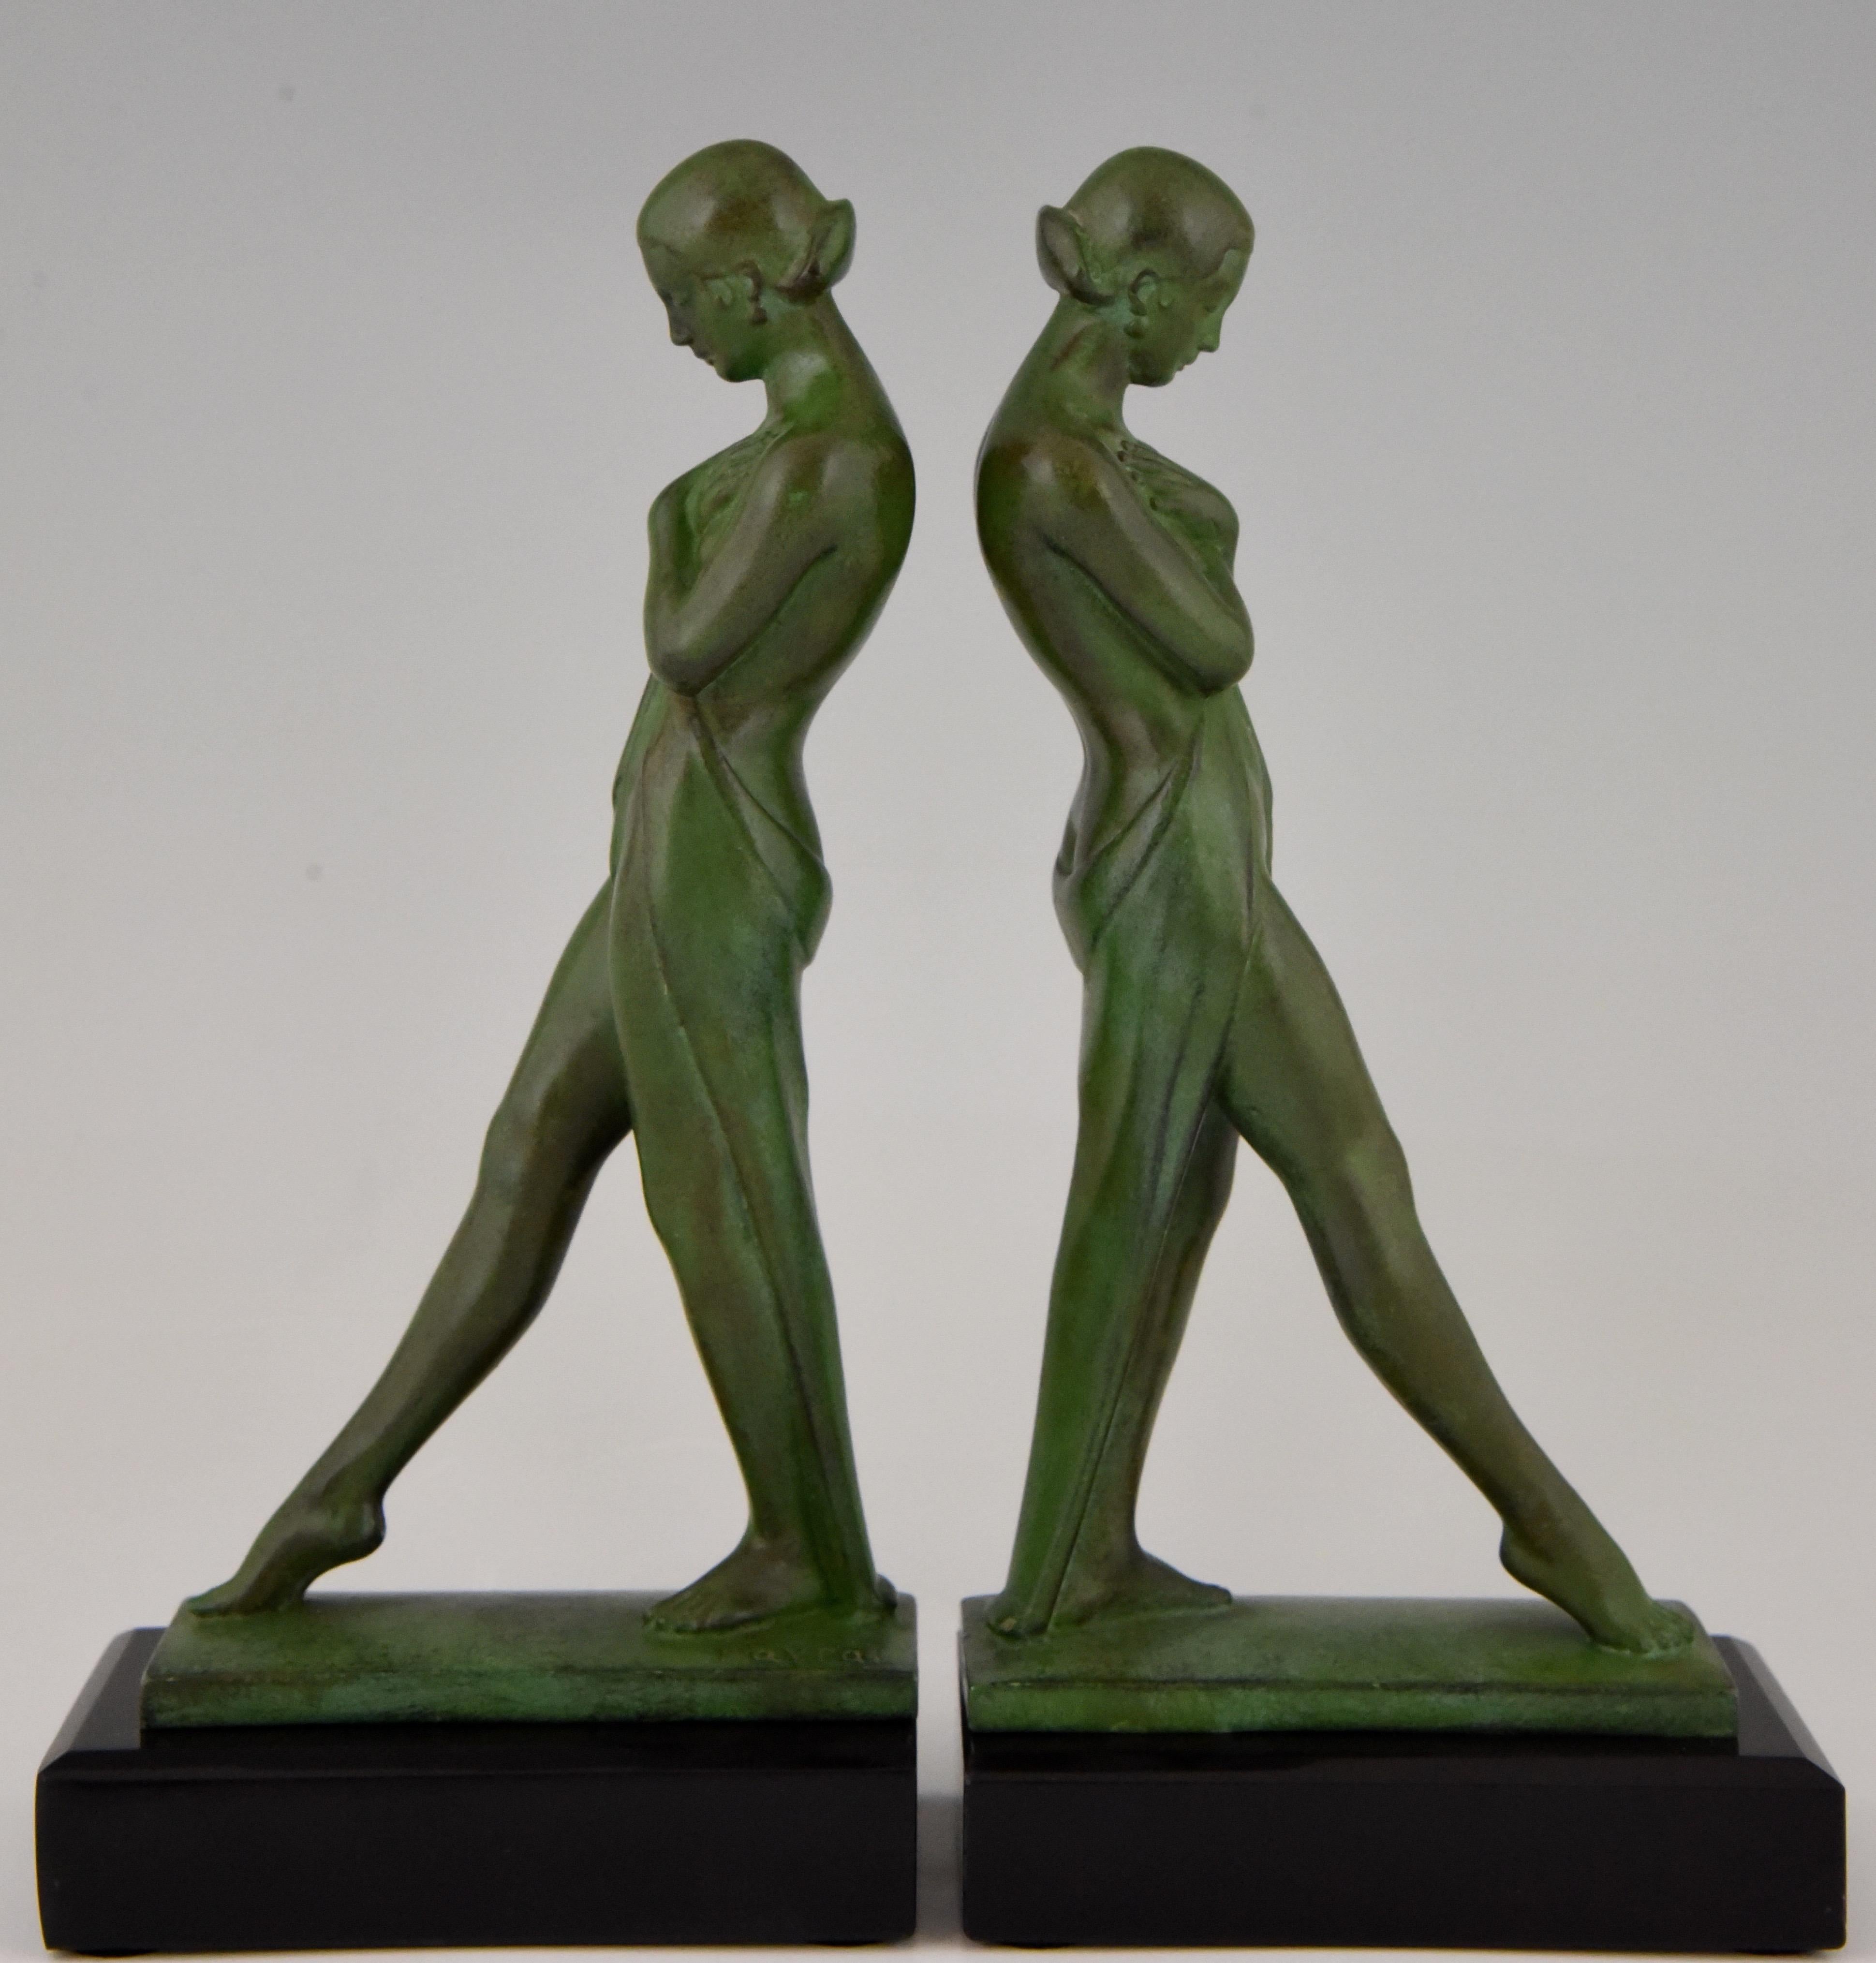 Beautiful pair of Art Deco bookends picturing standing draped nudes.
Sigend by Fayral, Pierre Le Faguays and marked by the founder Max Le Verrier, France, 1930. Art metal with green patina on Belgian black marble base.